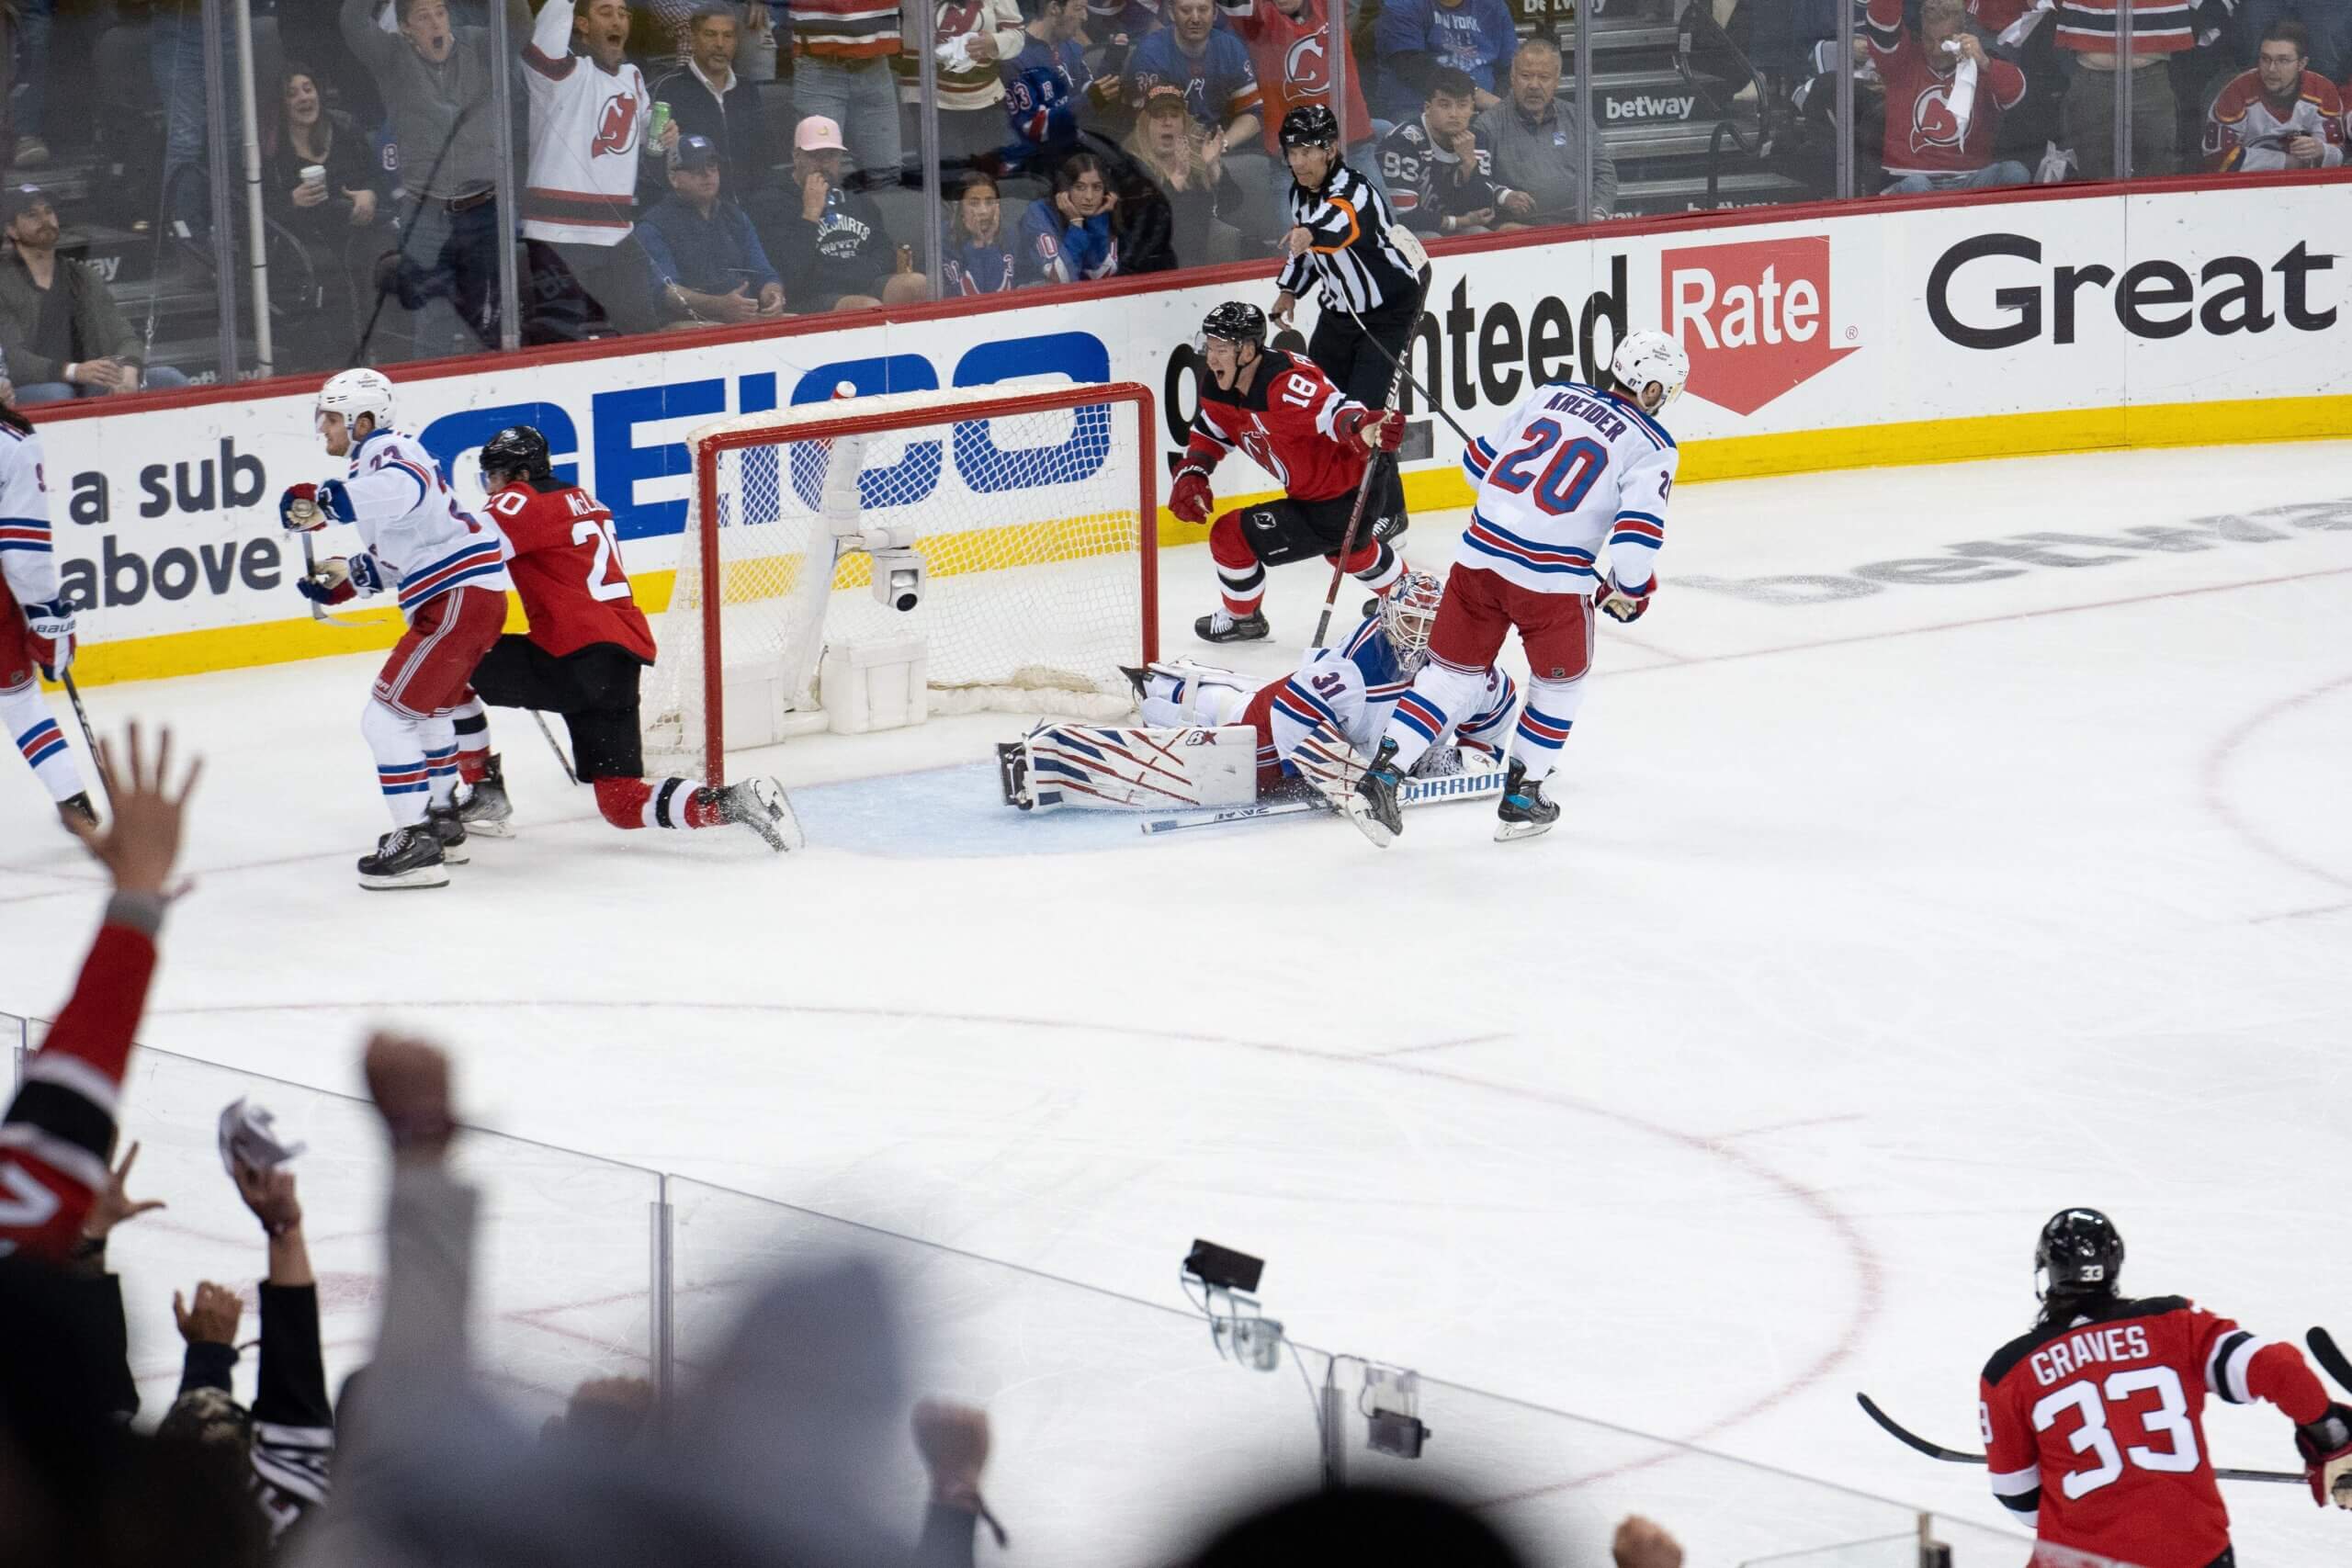 Devils advance to Cup finals with win over Rangers - The San Diego